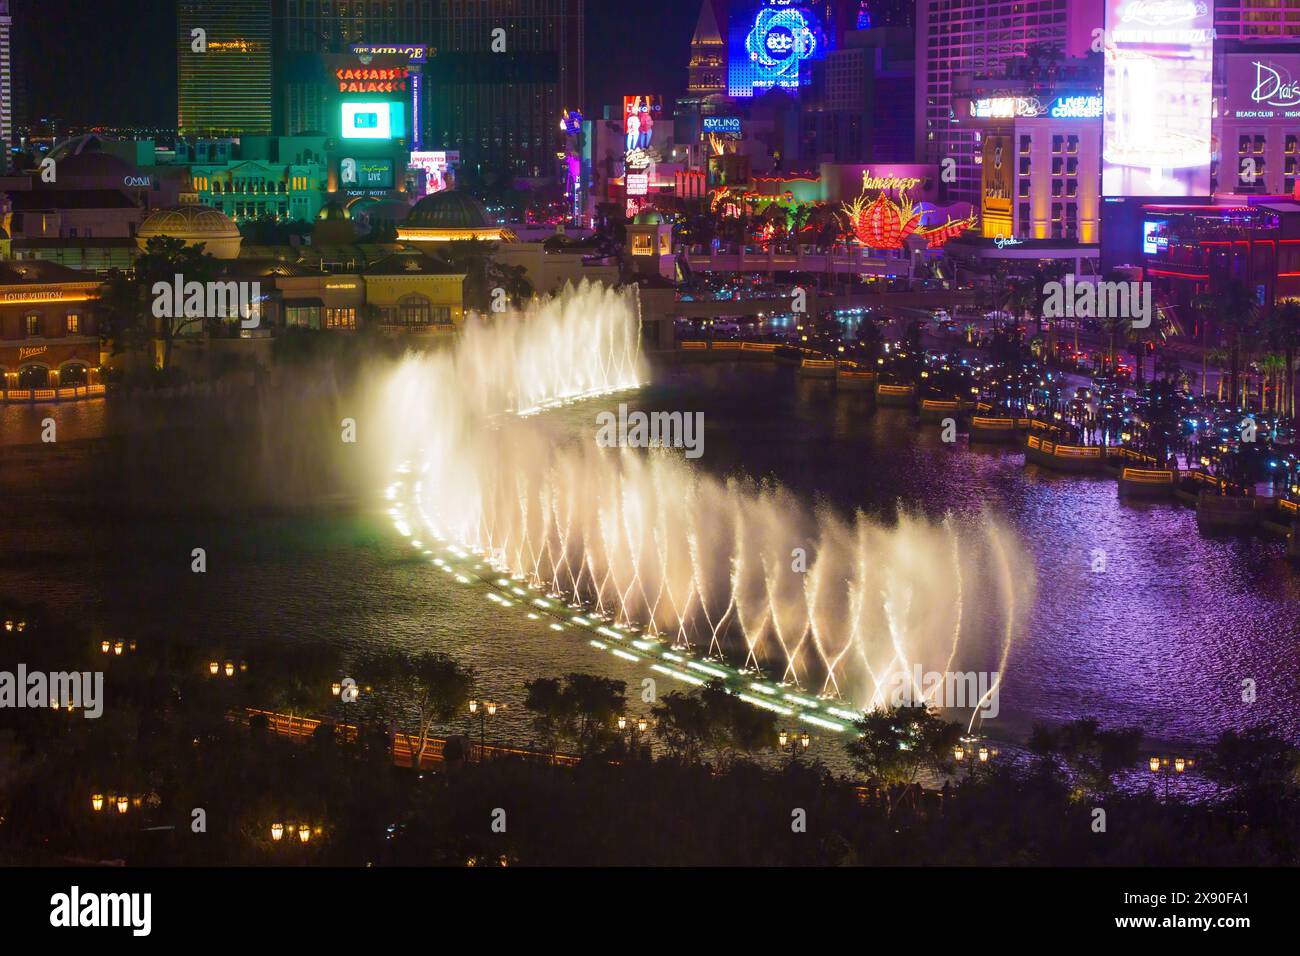 Las Vegas, Nevada - April 14, 2024: Dancing Bellagio Fountains View from a Hotel Room Stock Photo